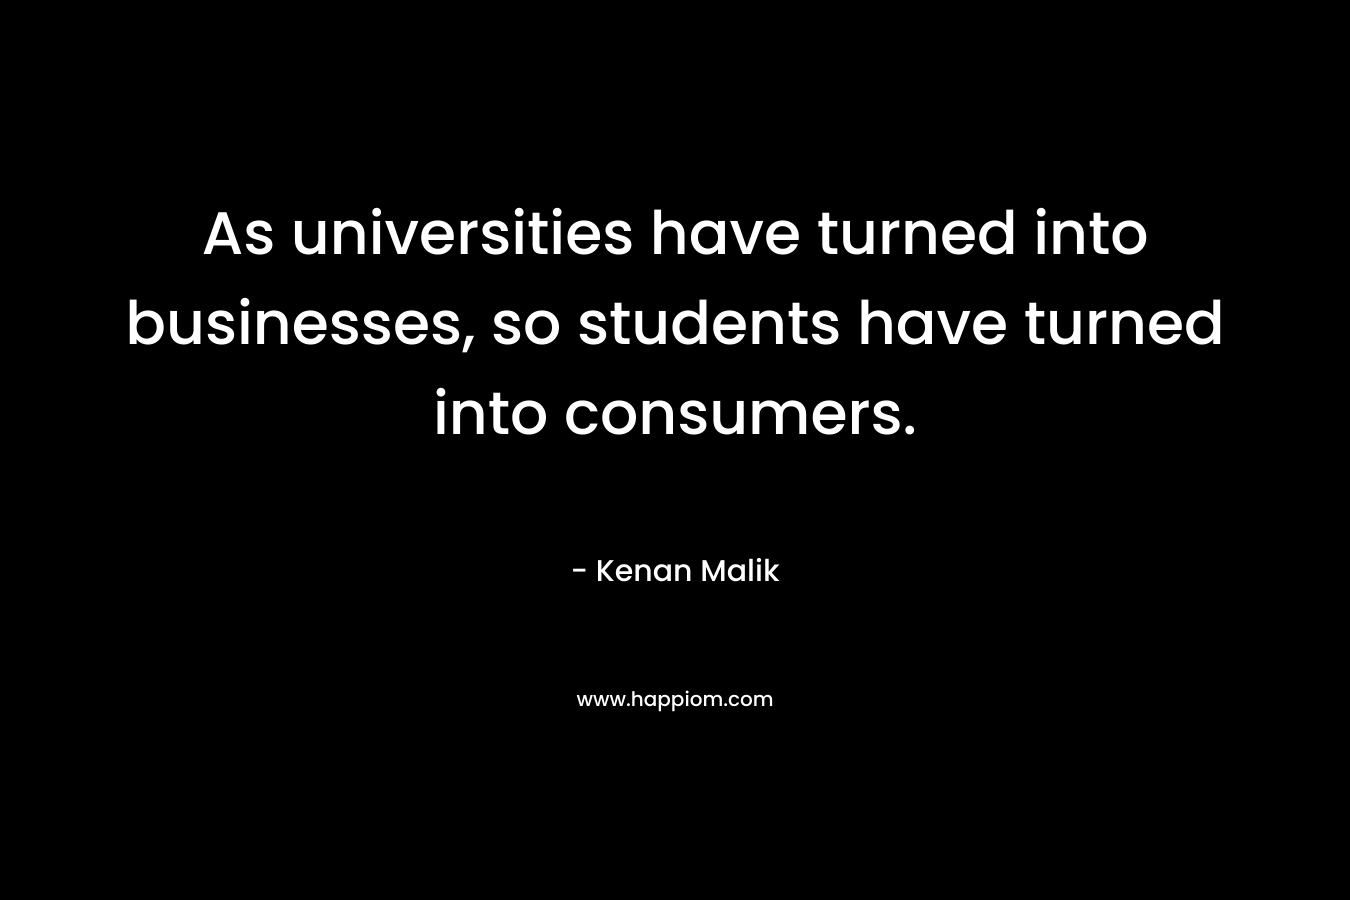 As universities have turned into businesses, so students have turned into consumers. – Kenan Malik